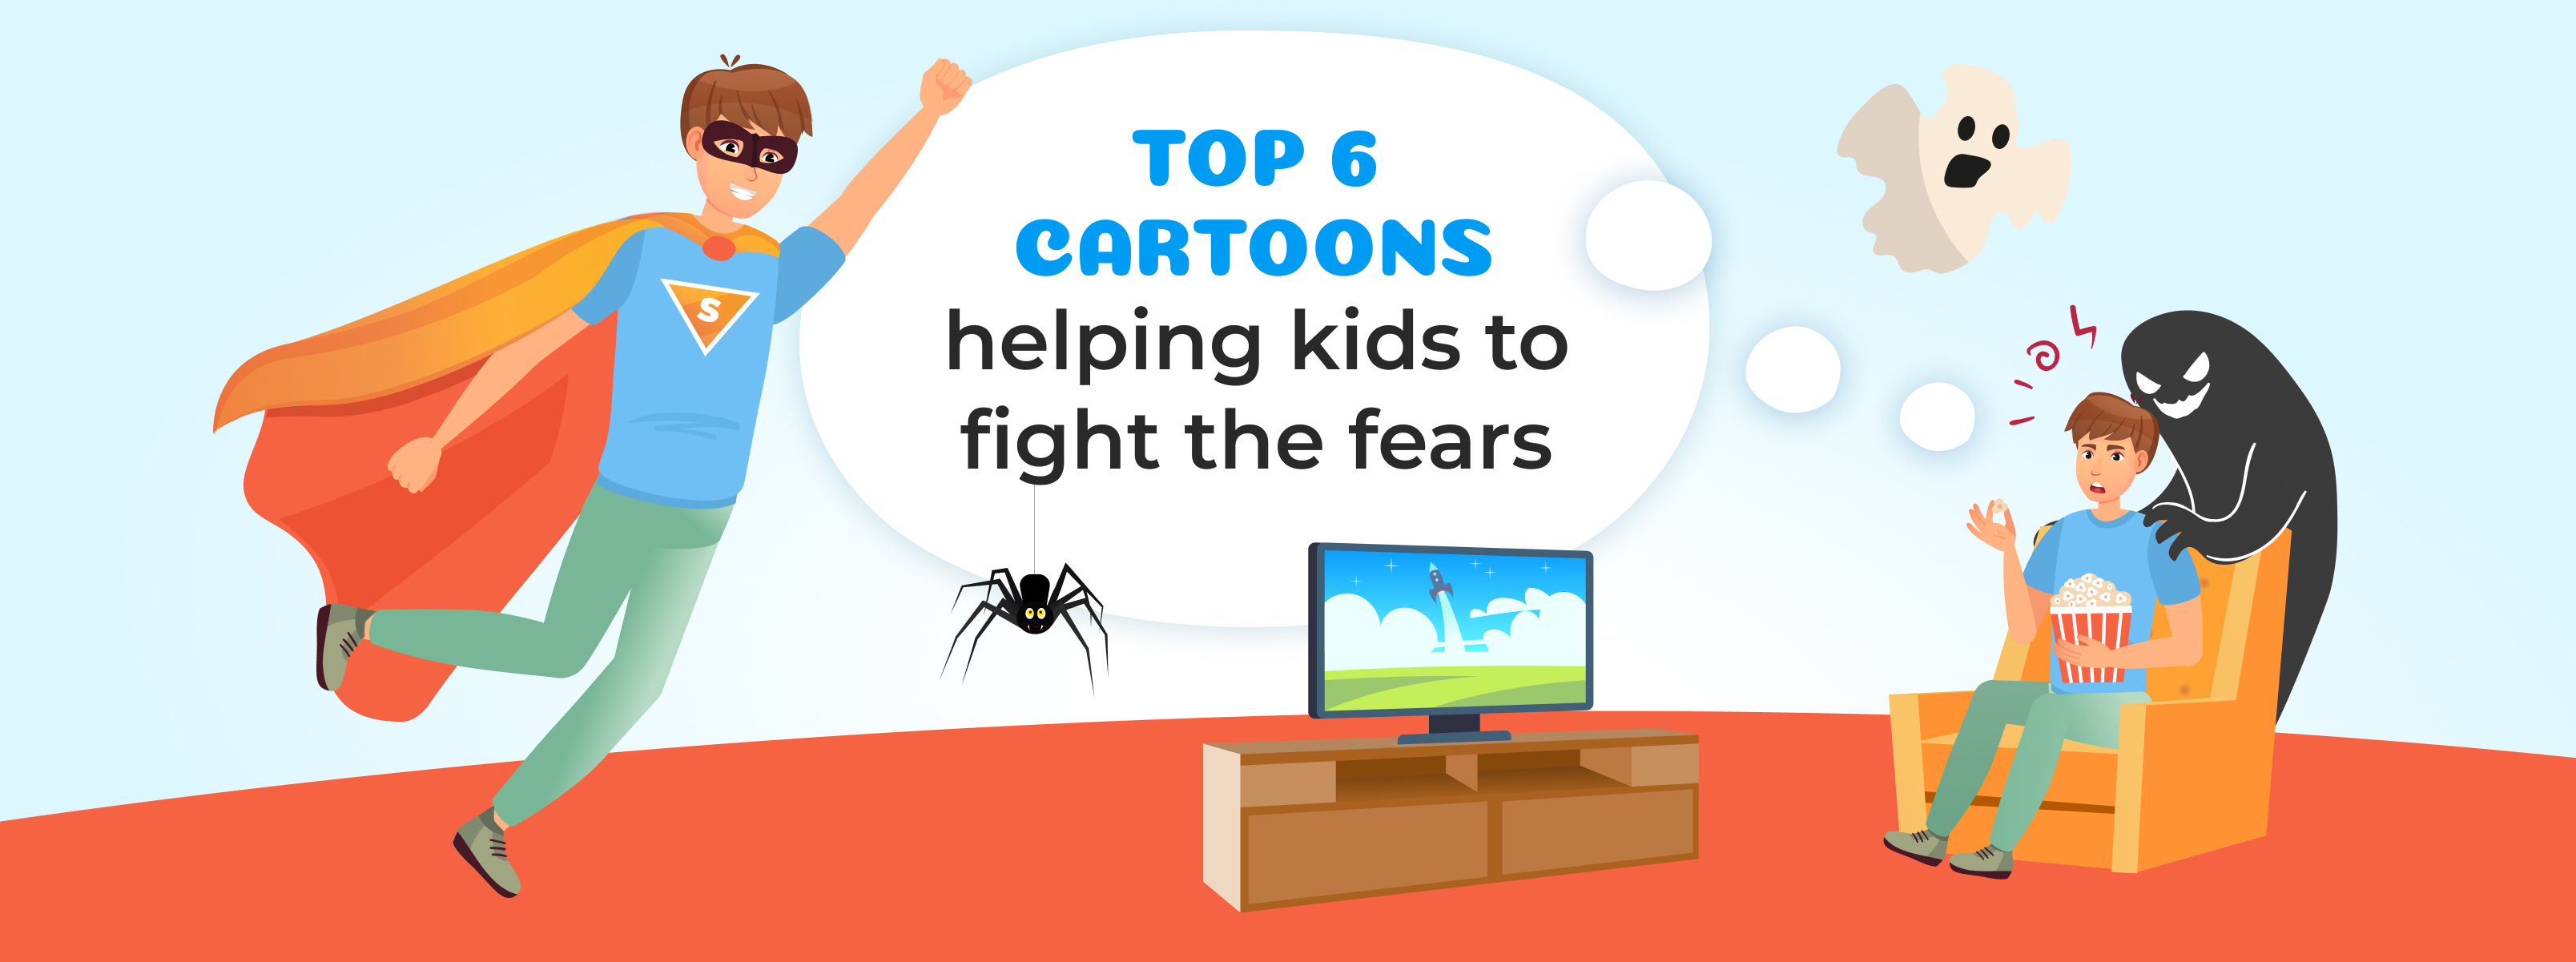 Top 6 cartoons that will teach kids how to deal with their fears